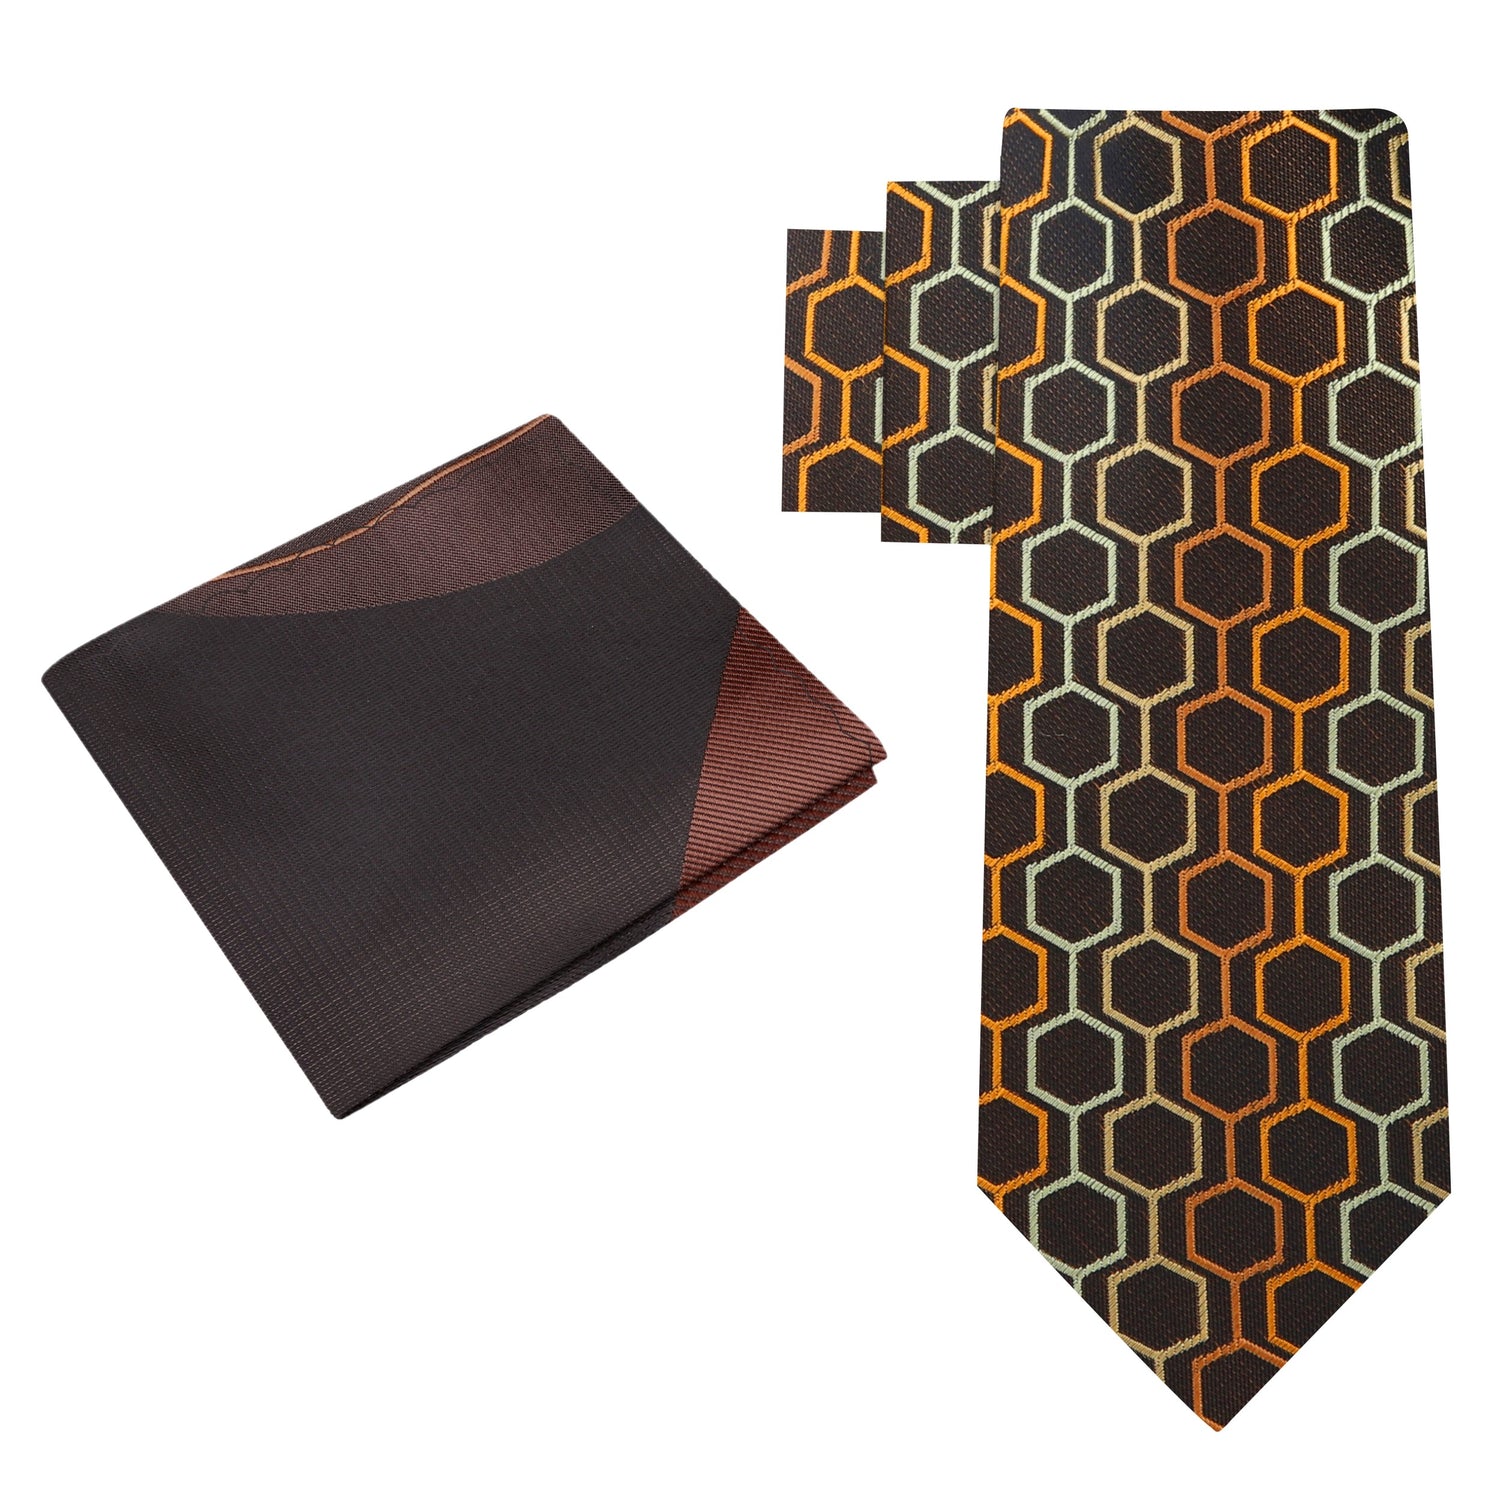 Alt View: Shades of Brown Geometric Necktie and Brown Abstract Square